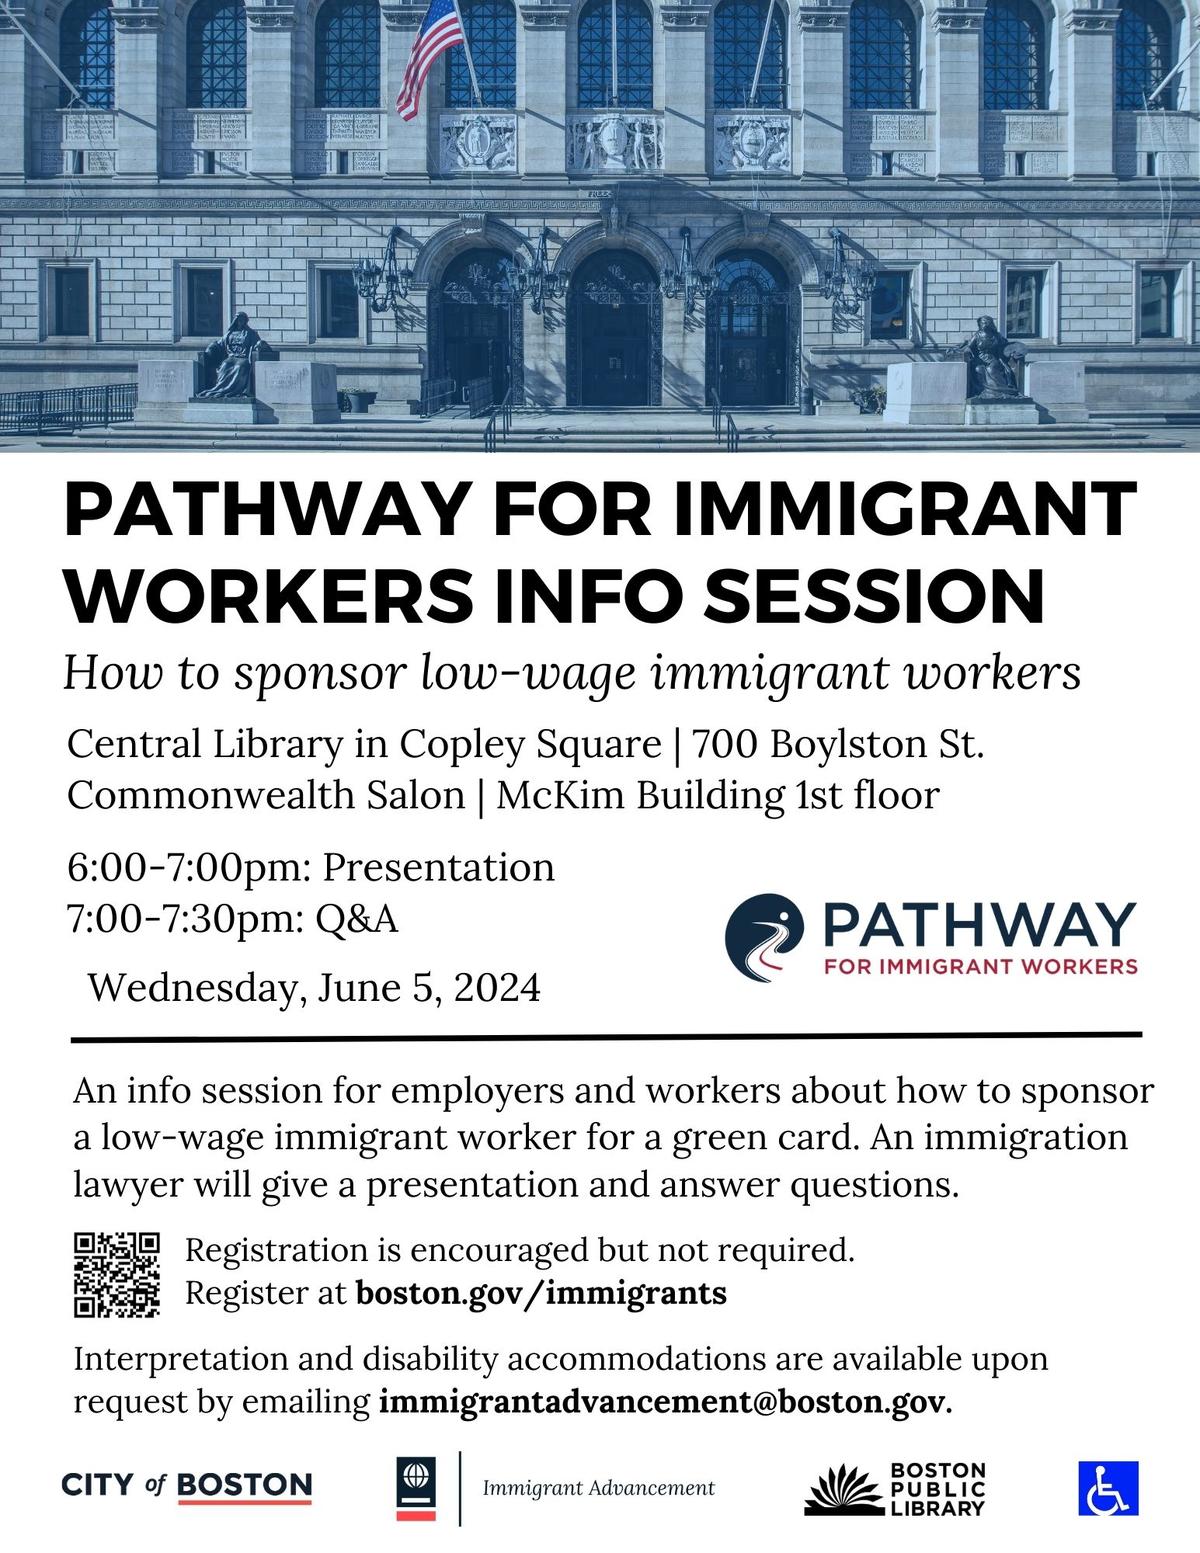 Flyer for an employer info session about how to sponsor low-wage immigrant workers. On Wednesday, June 5, 2024 from 6-7:30pm